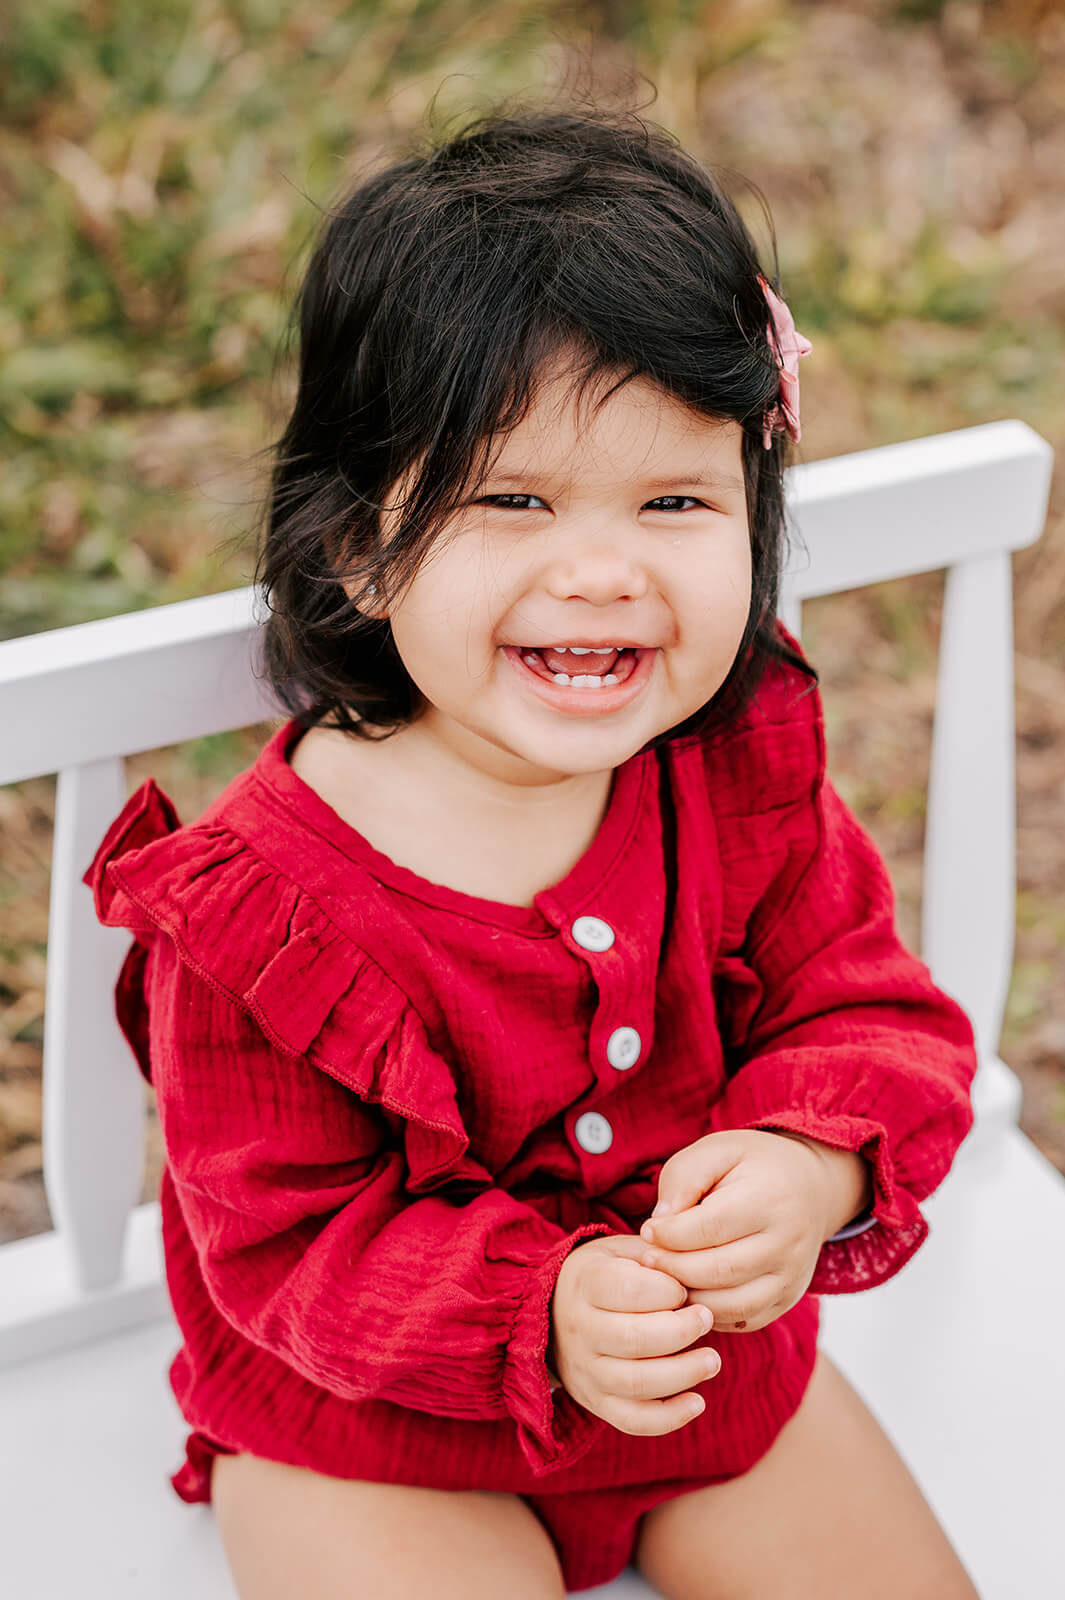 A young girl in a red onesie sits on a wooden bench in a park laughing after visiting childtime of indian trail